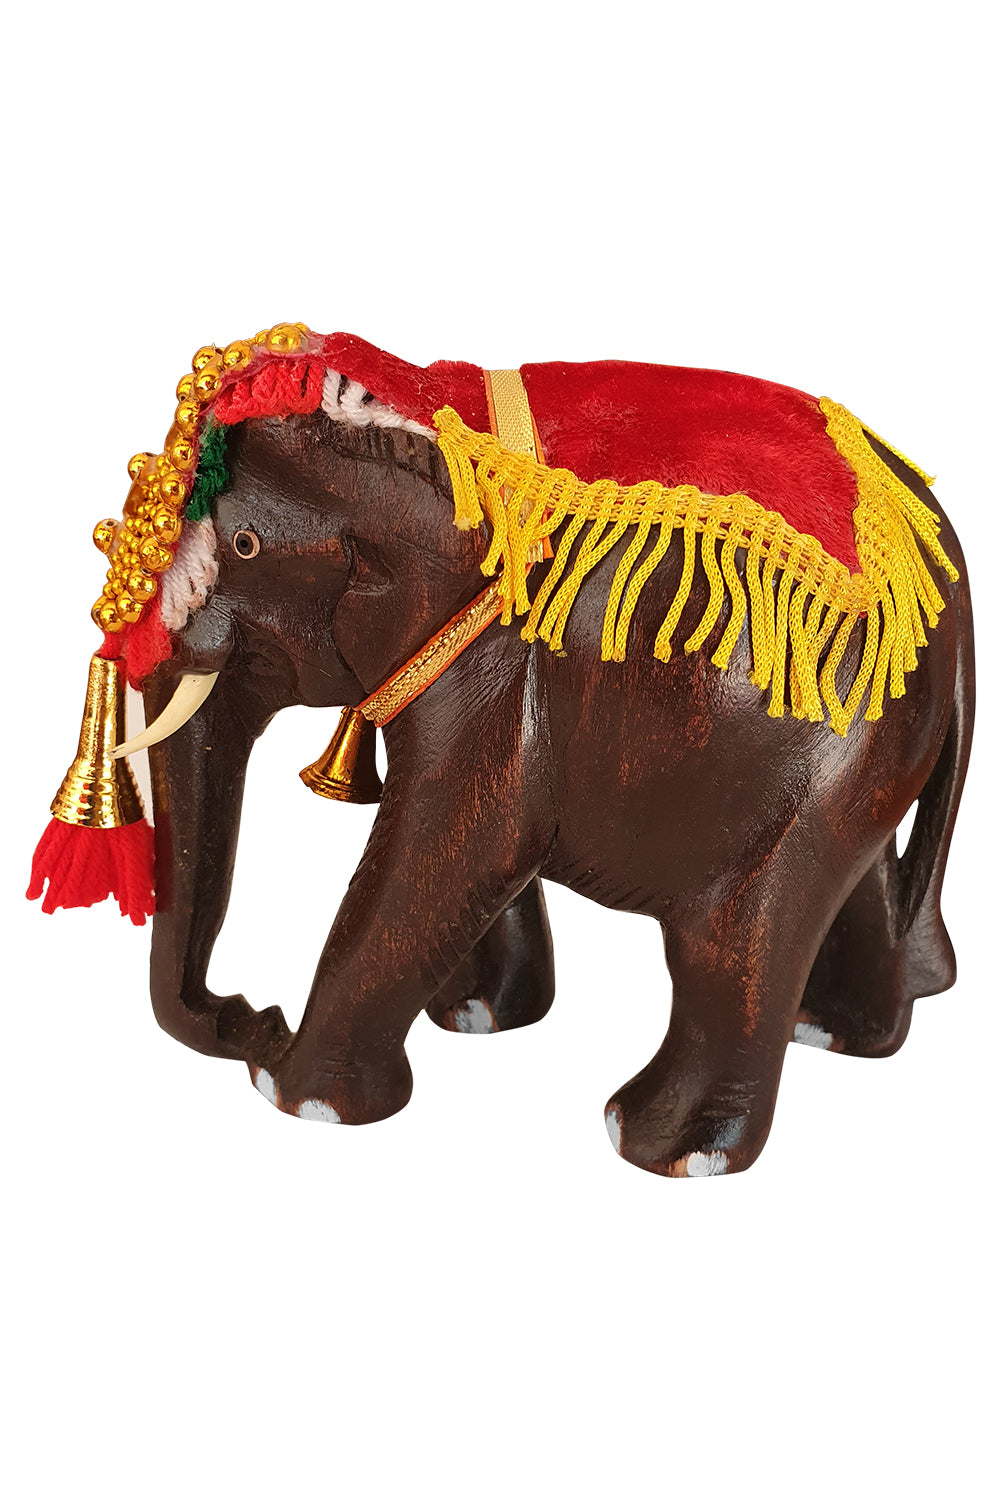 Southloom Handmade Temple Elephant Handicraft (Carved from Mahogany Wood) 5 Inches